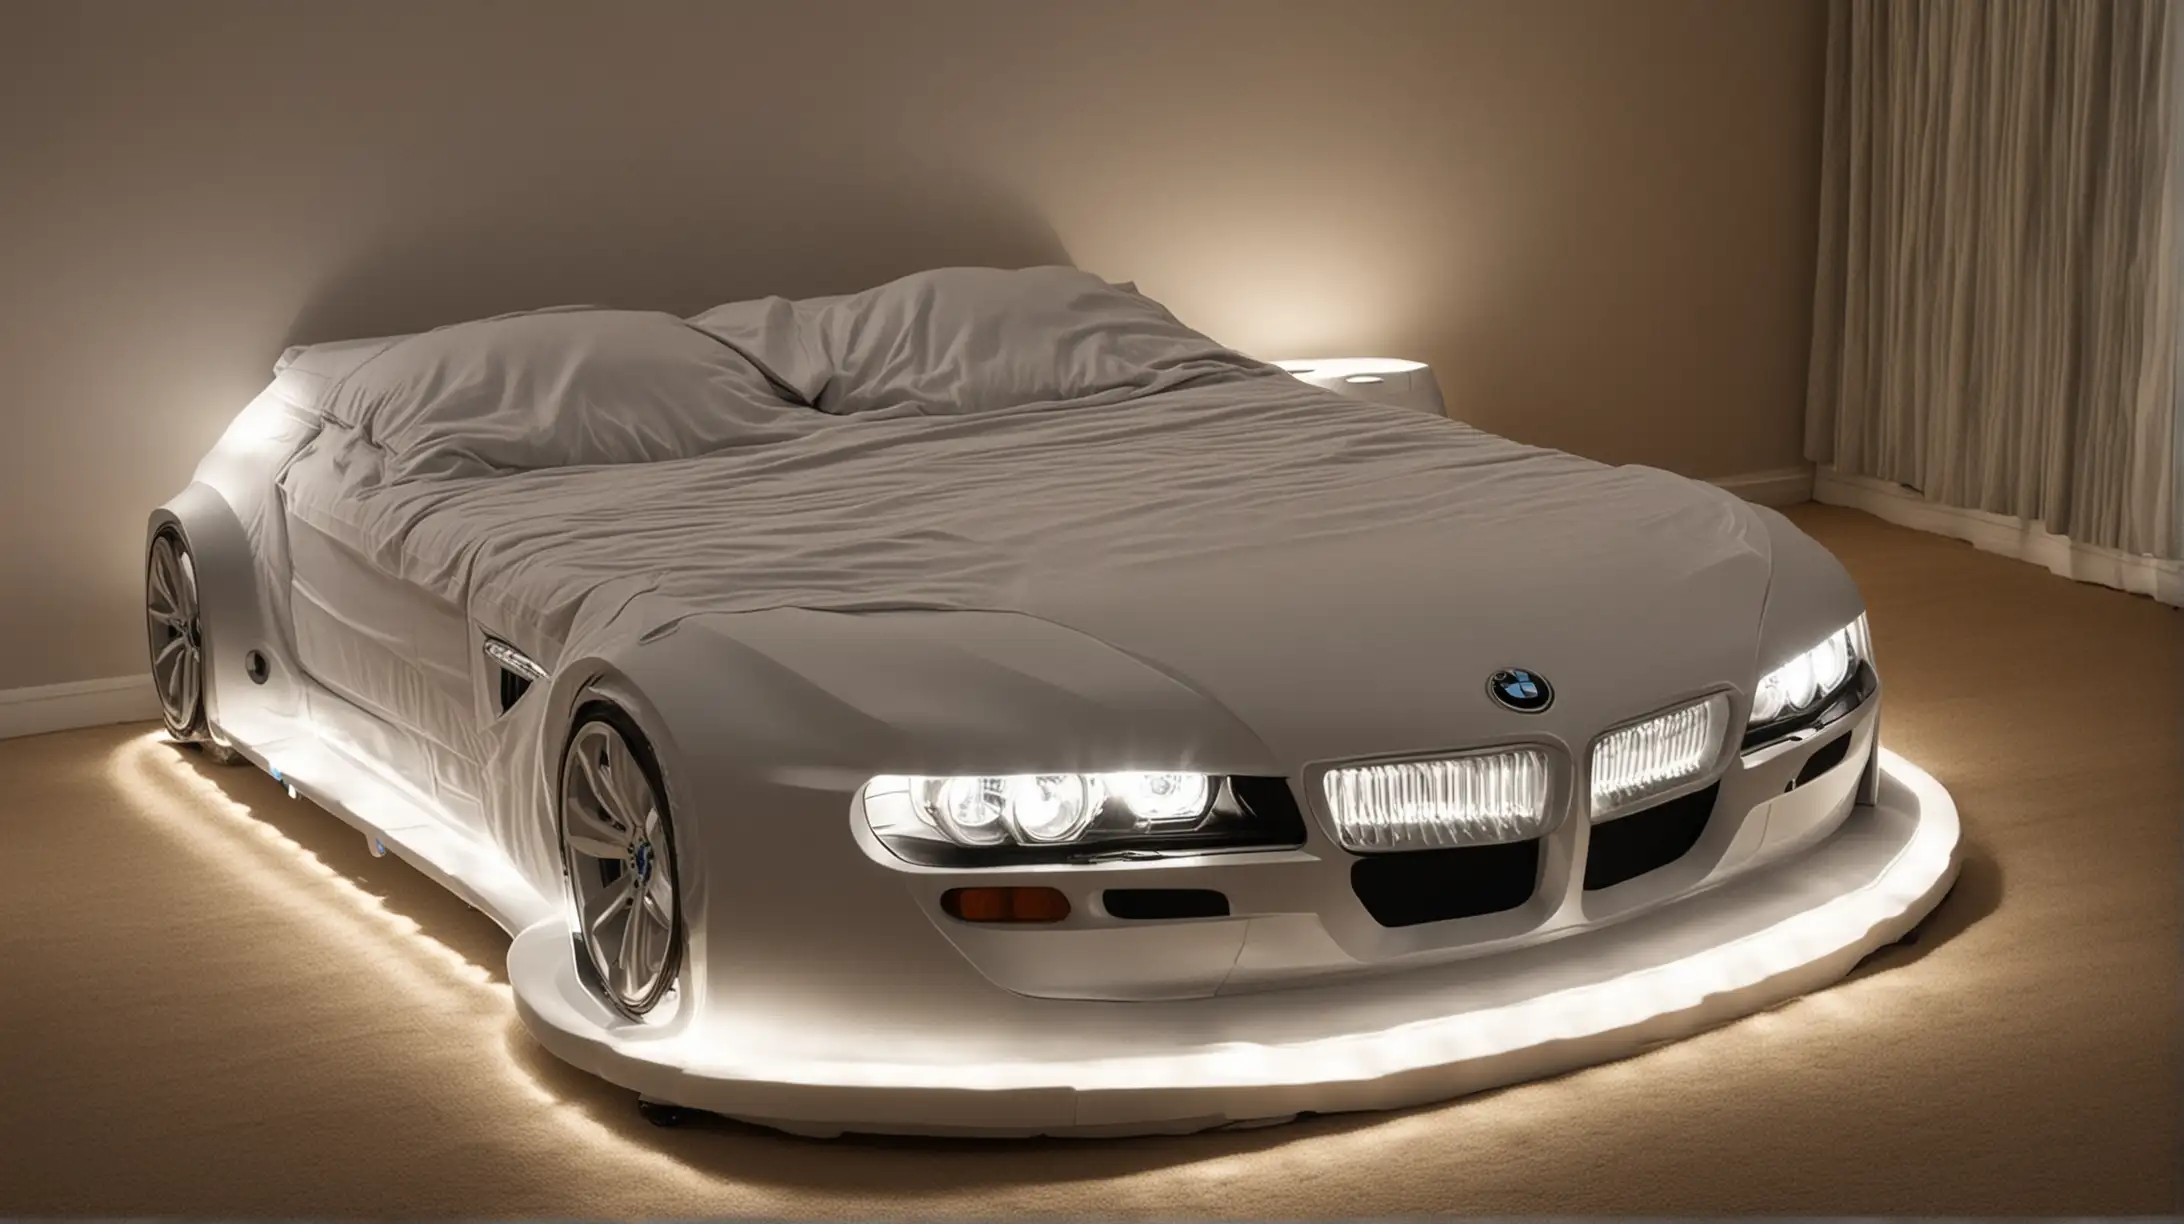 Double bed in the shape of a BMW car with headlights on 